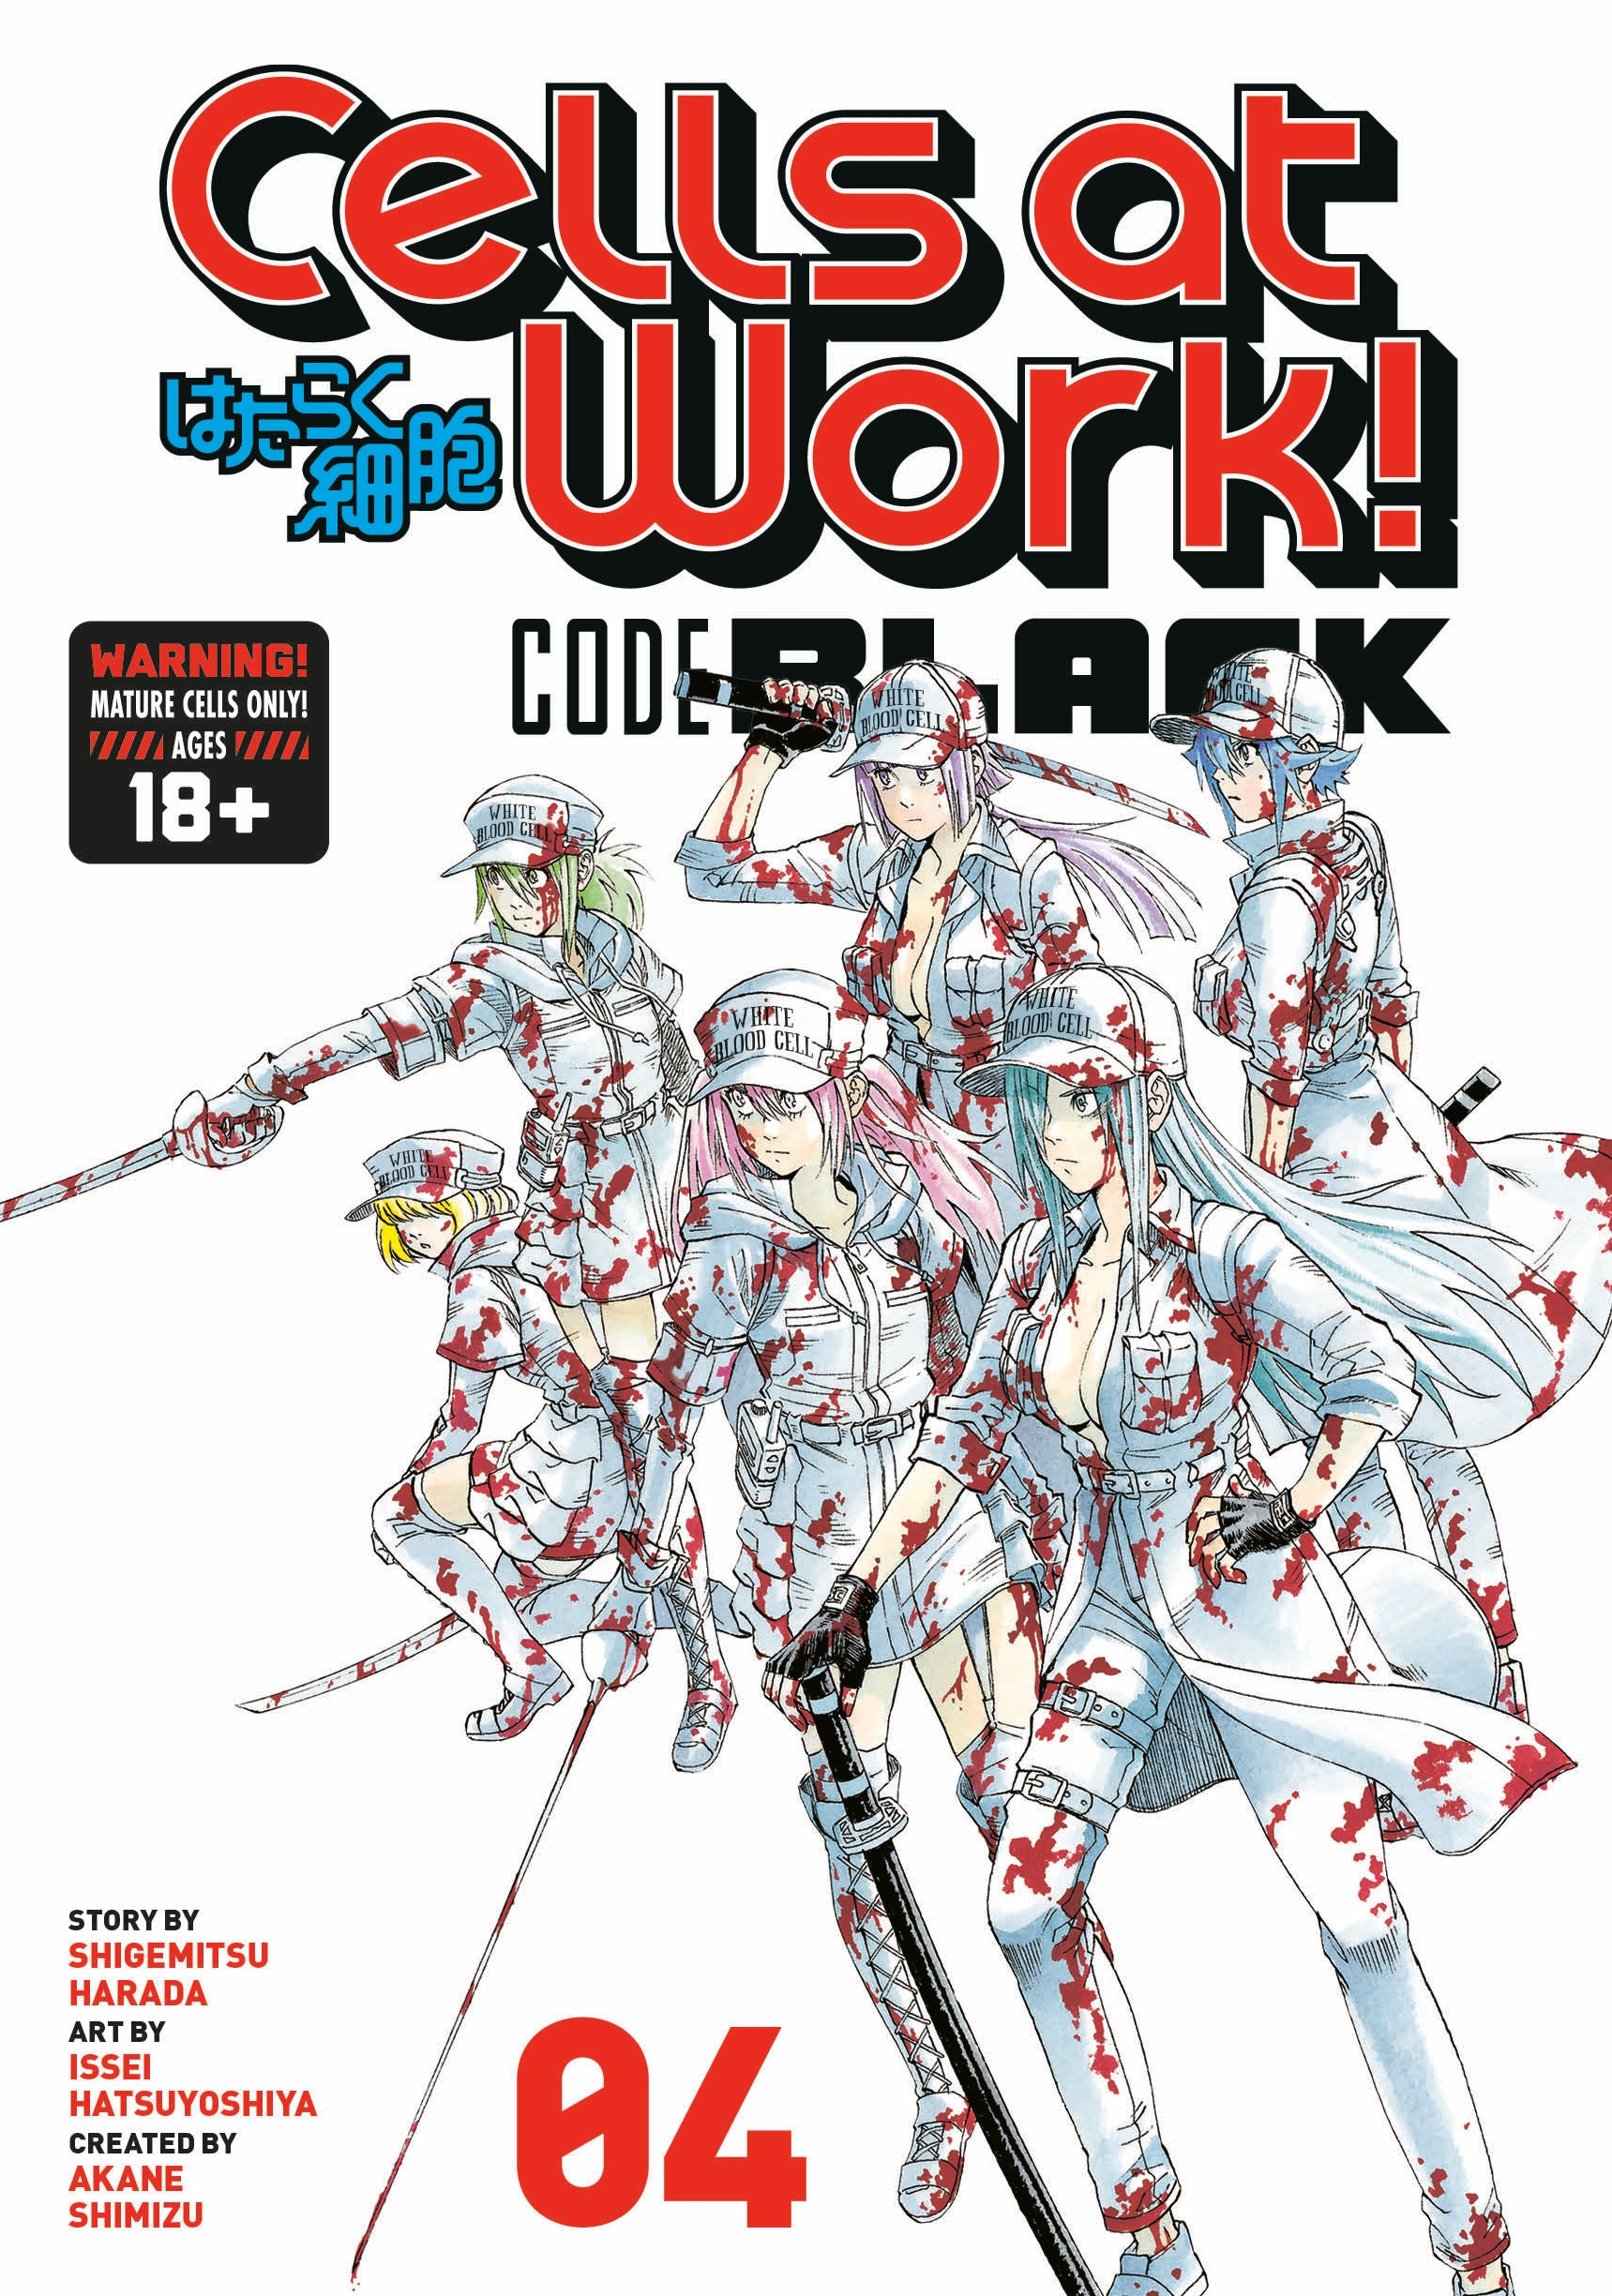 Cells At Work! Code Black Playlists : Free Download, Borrow, and